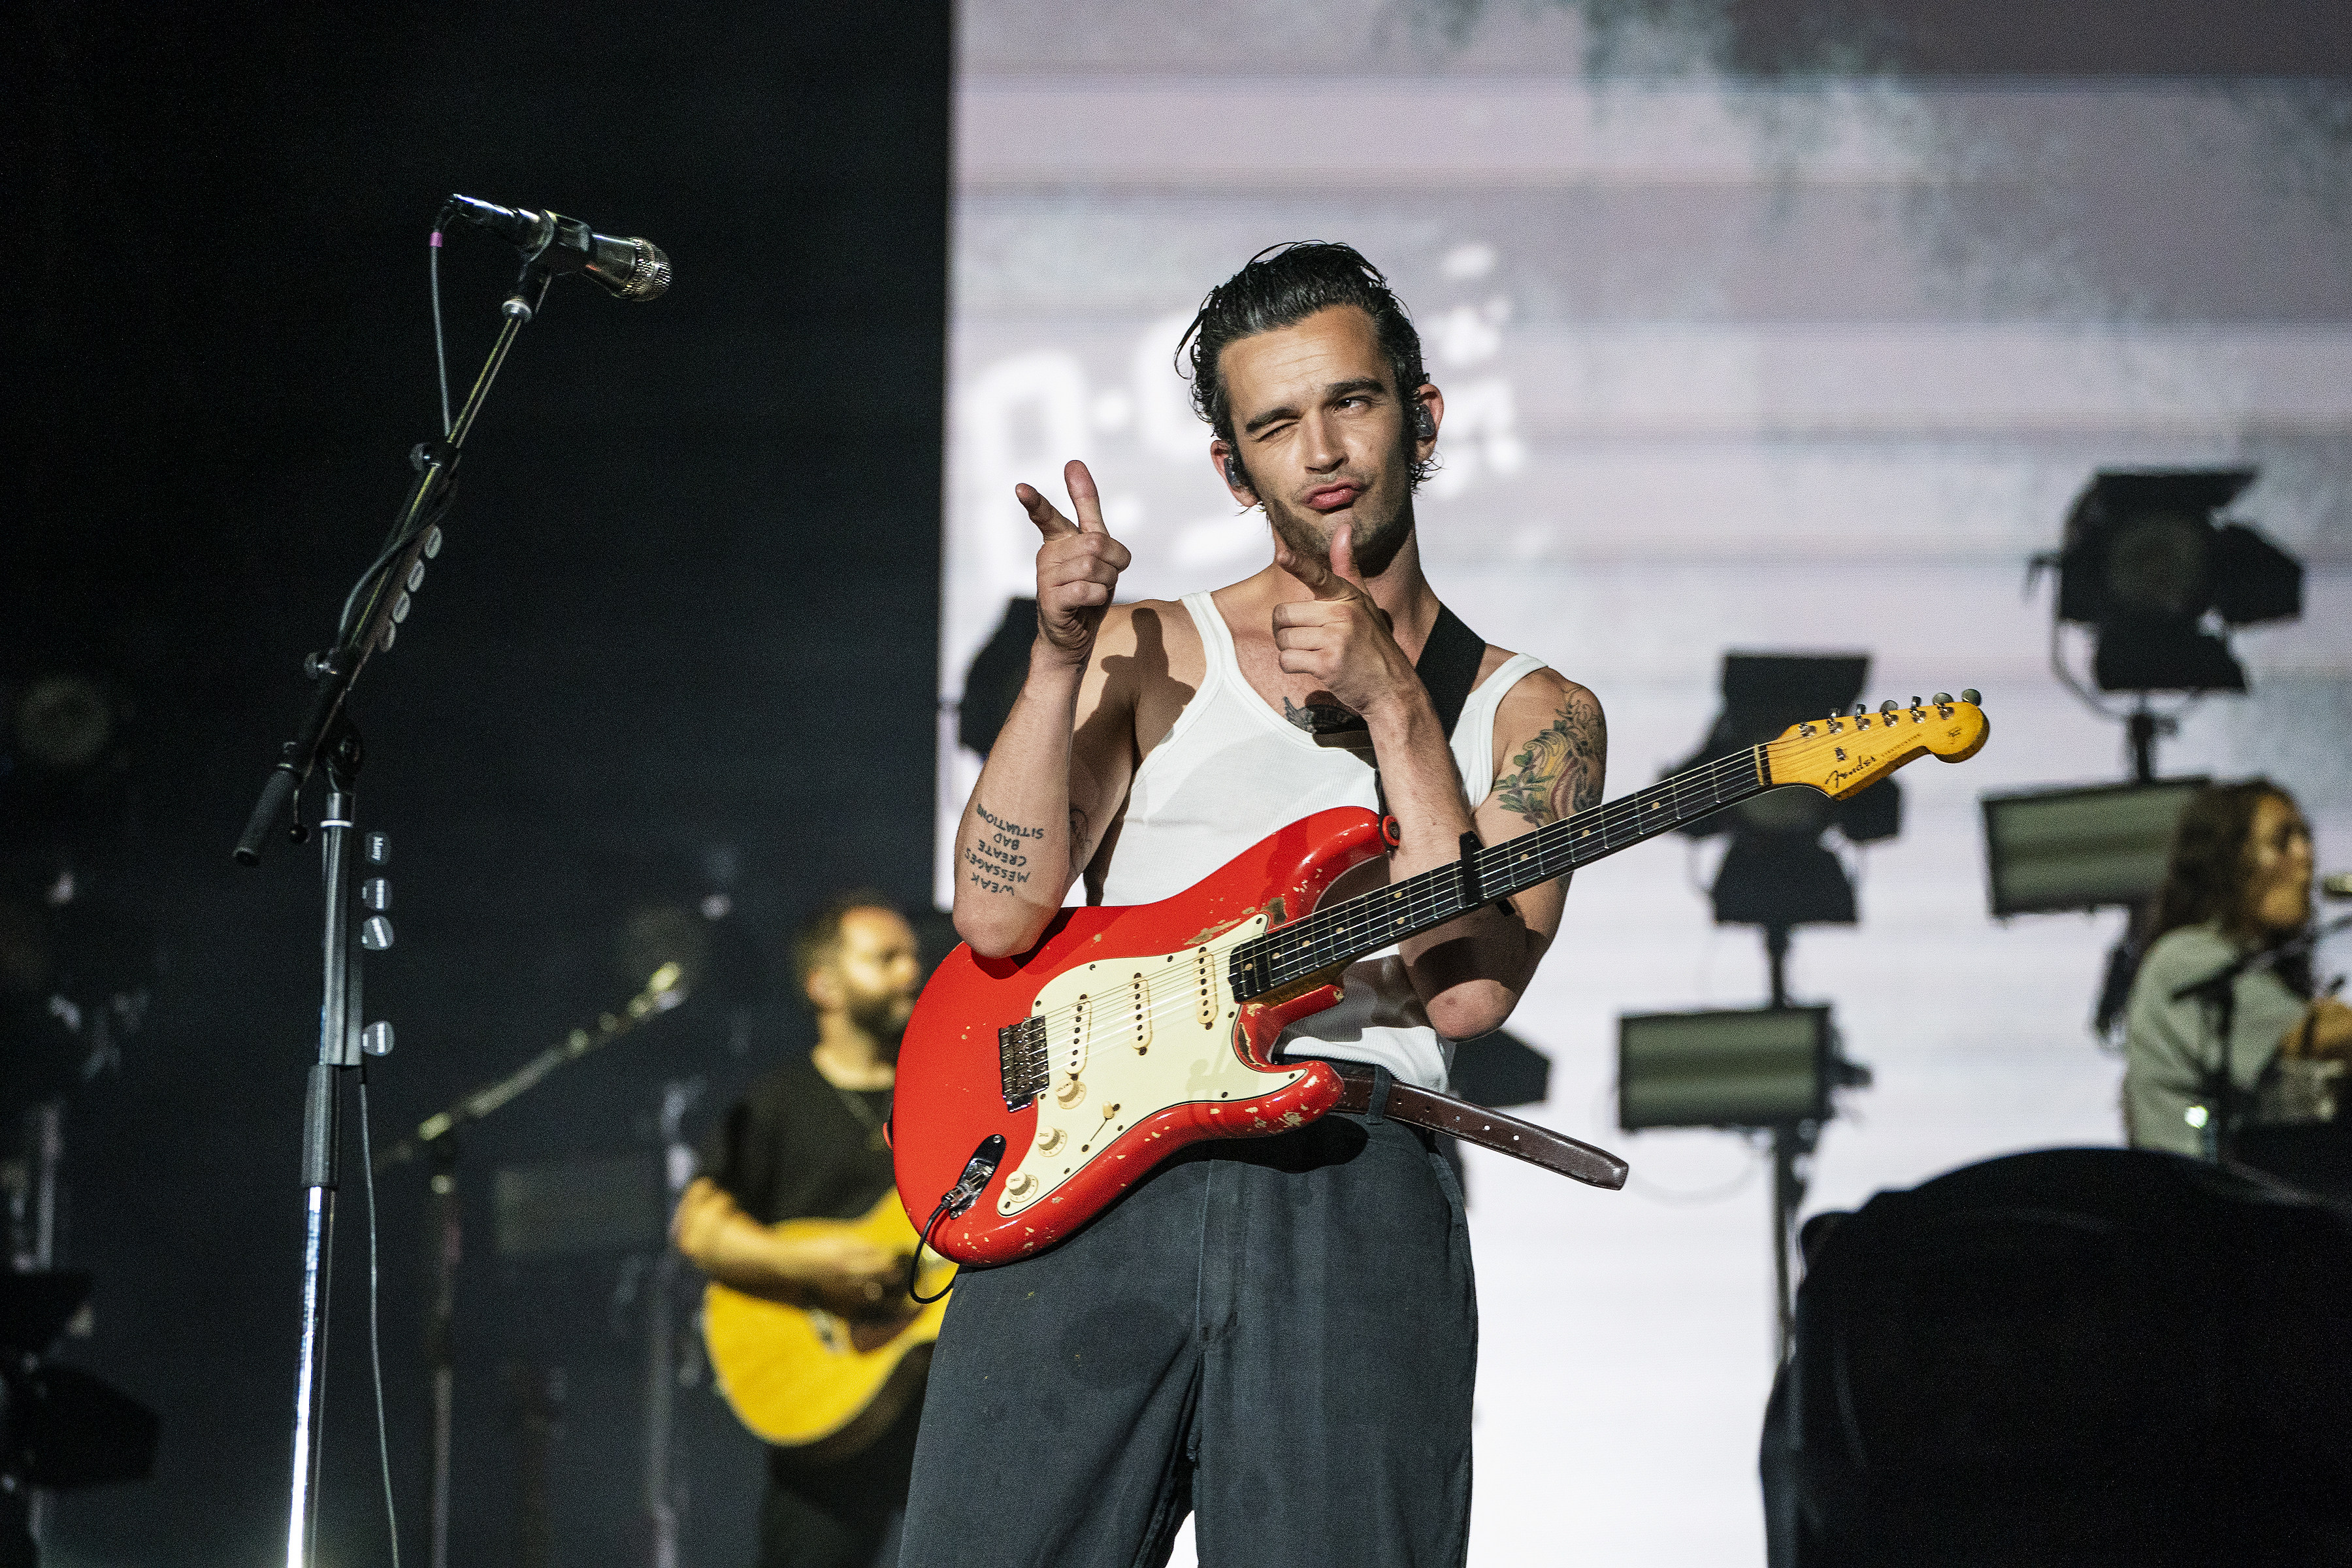 Matty Healy of The 1975 performs at the Lollapalooza Music Festival in Chicago. Photo; AP